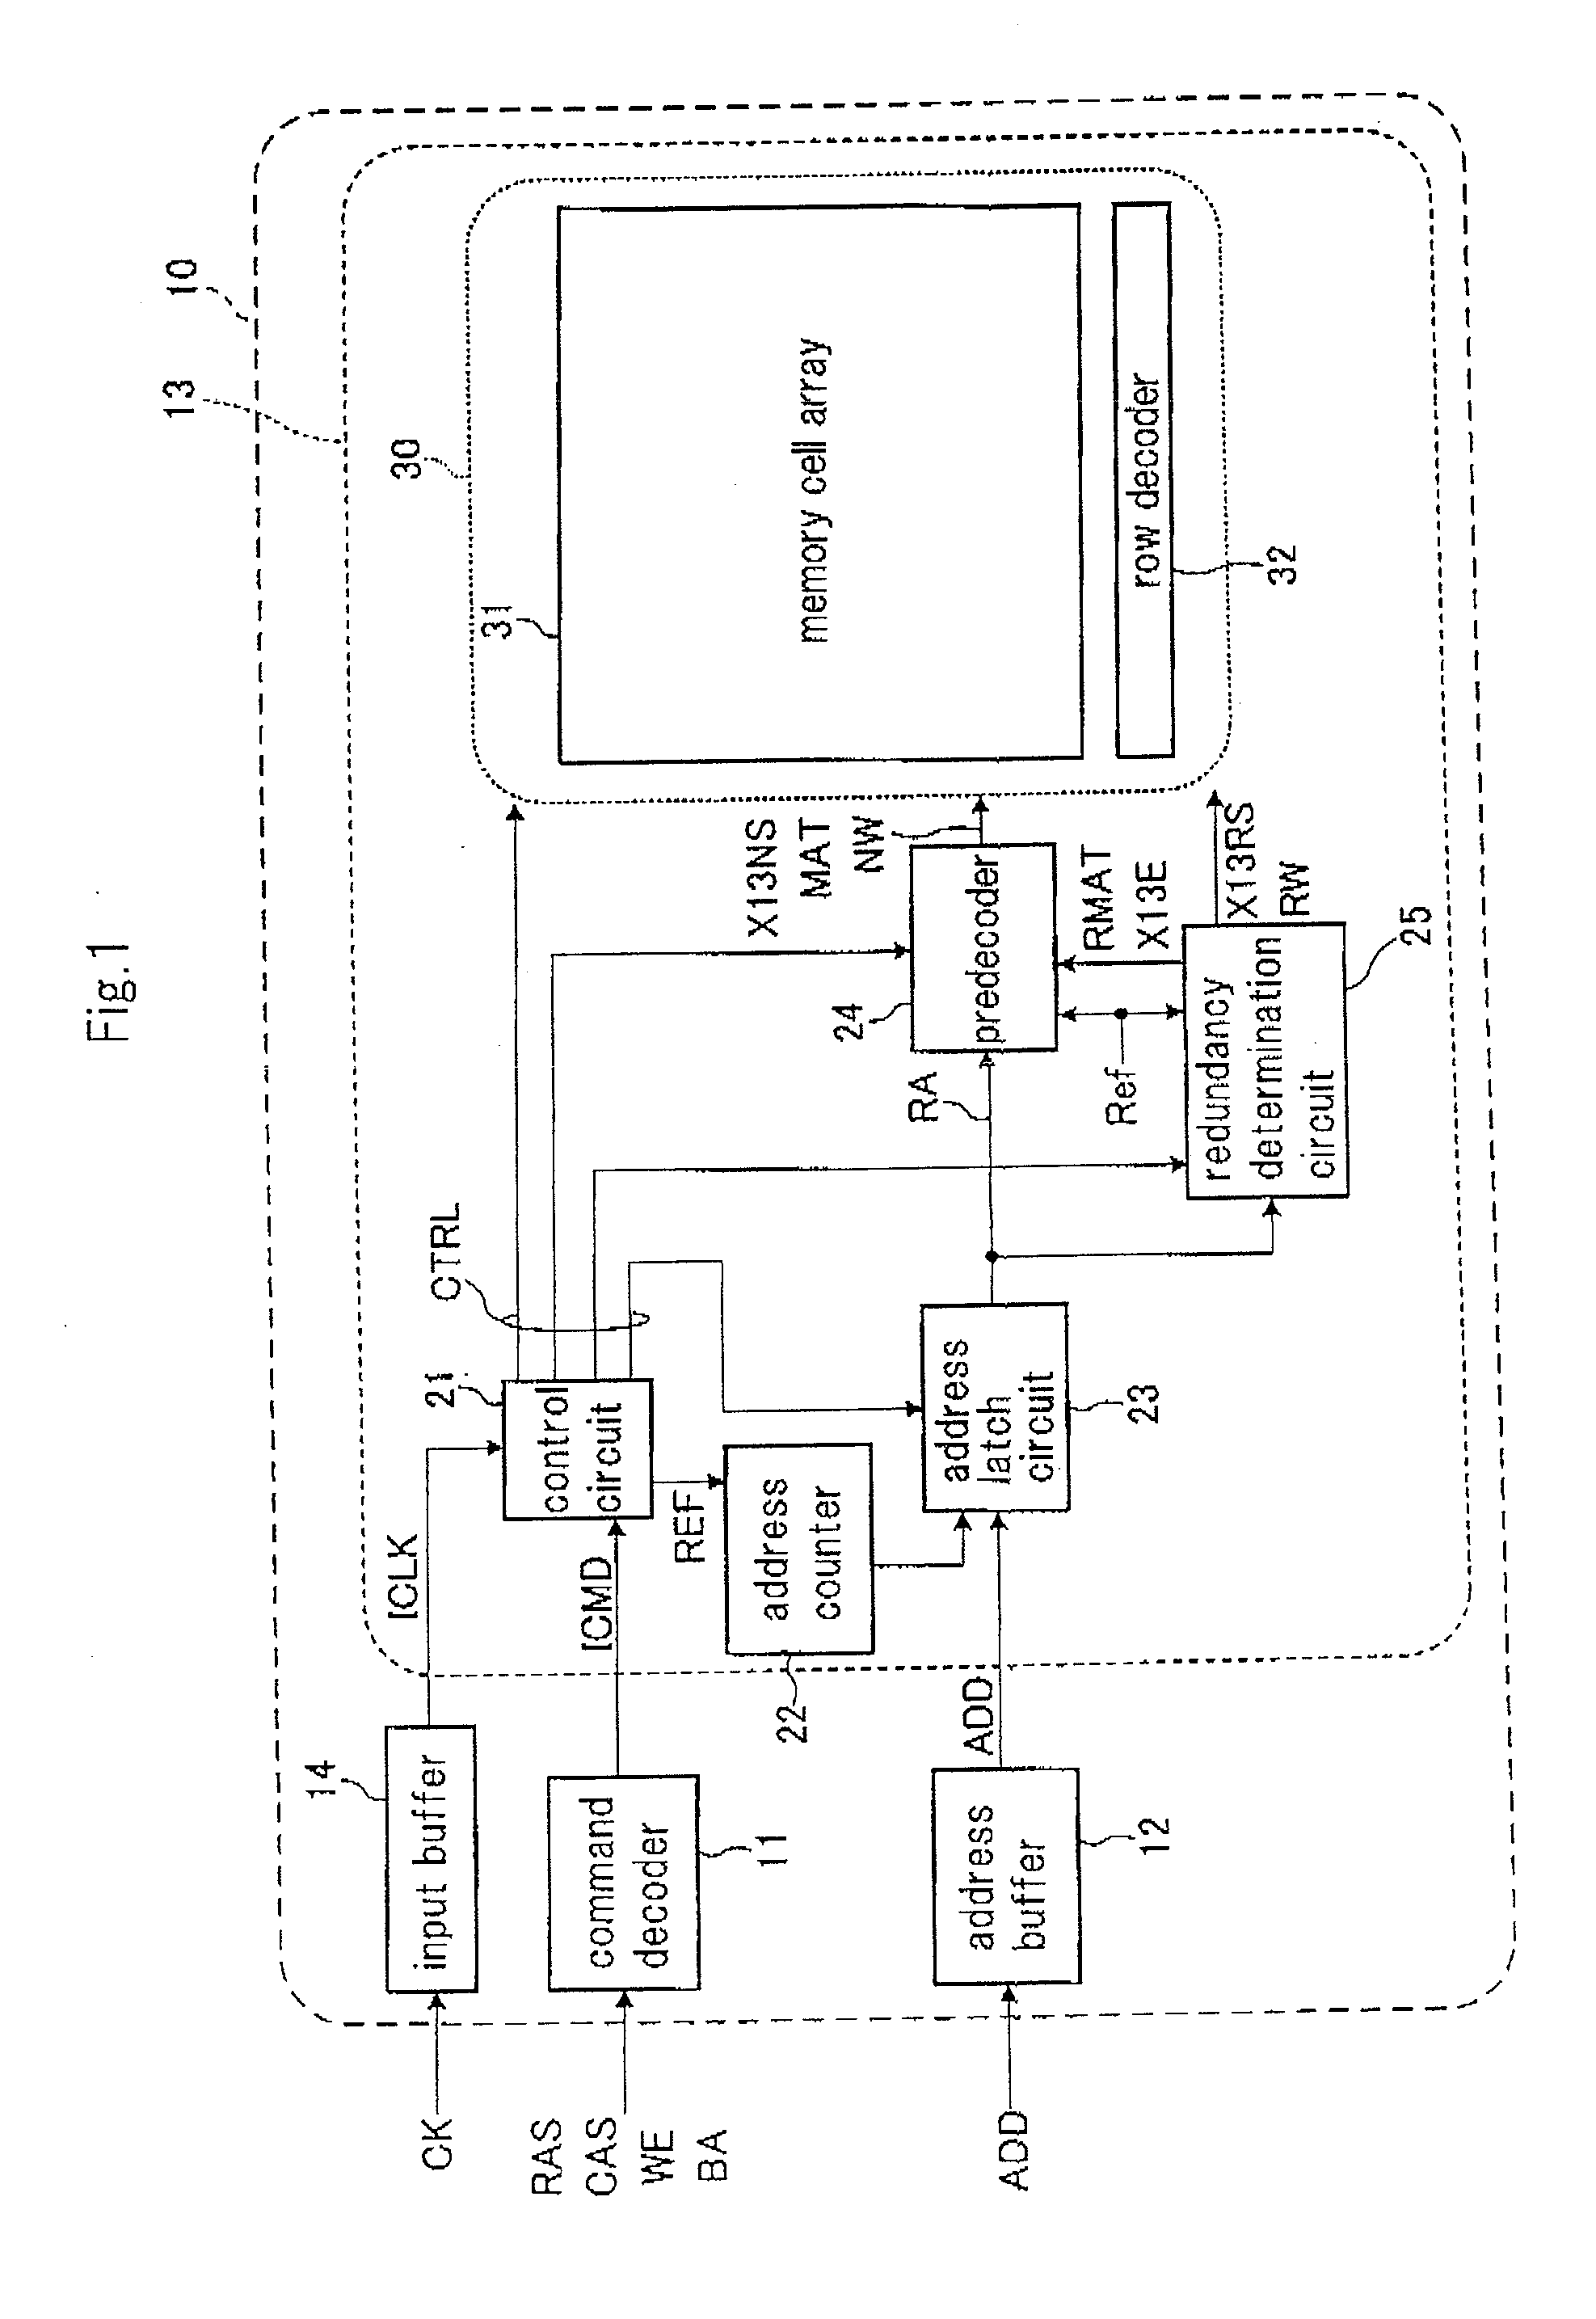 Semiconductor device enabling refreshing of redundant memory cell instead of defective memory cell